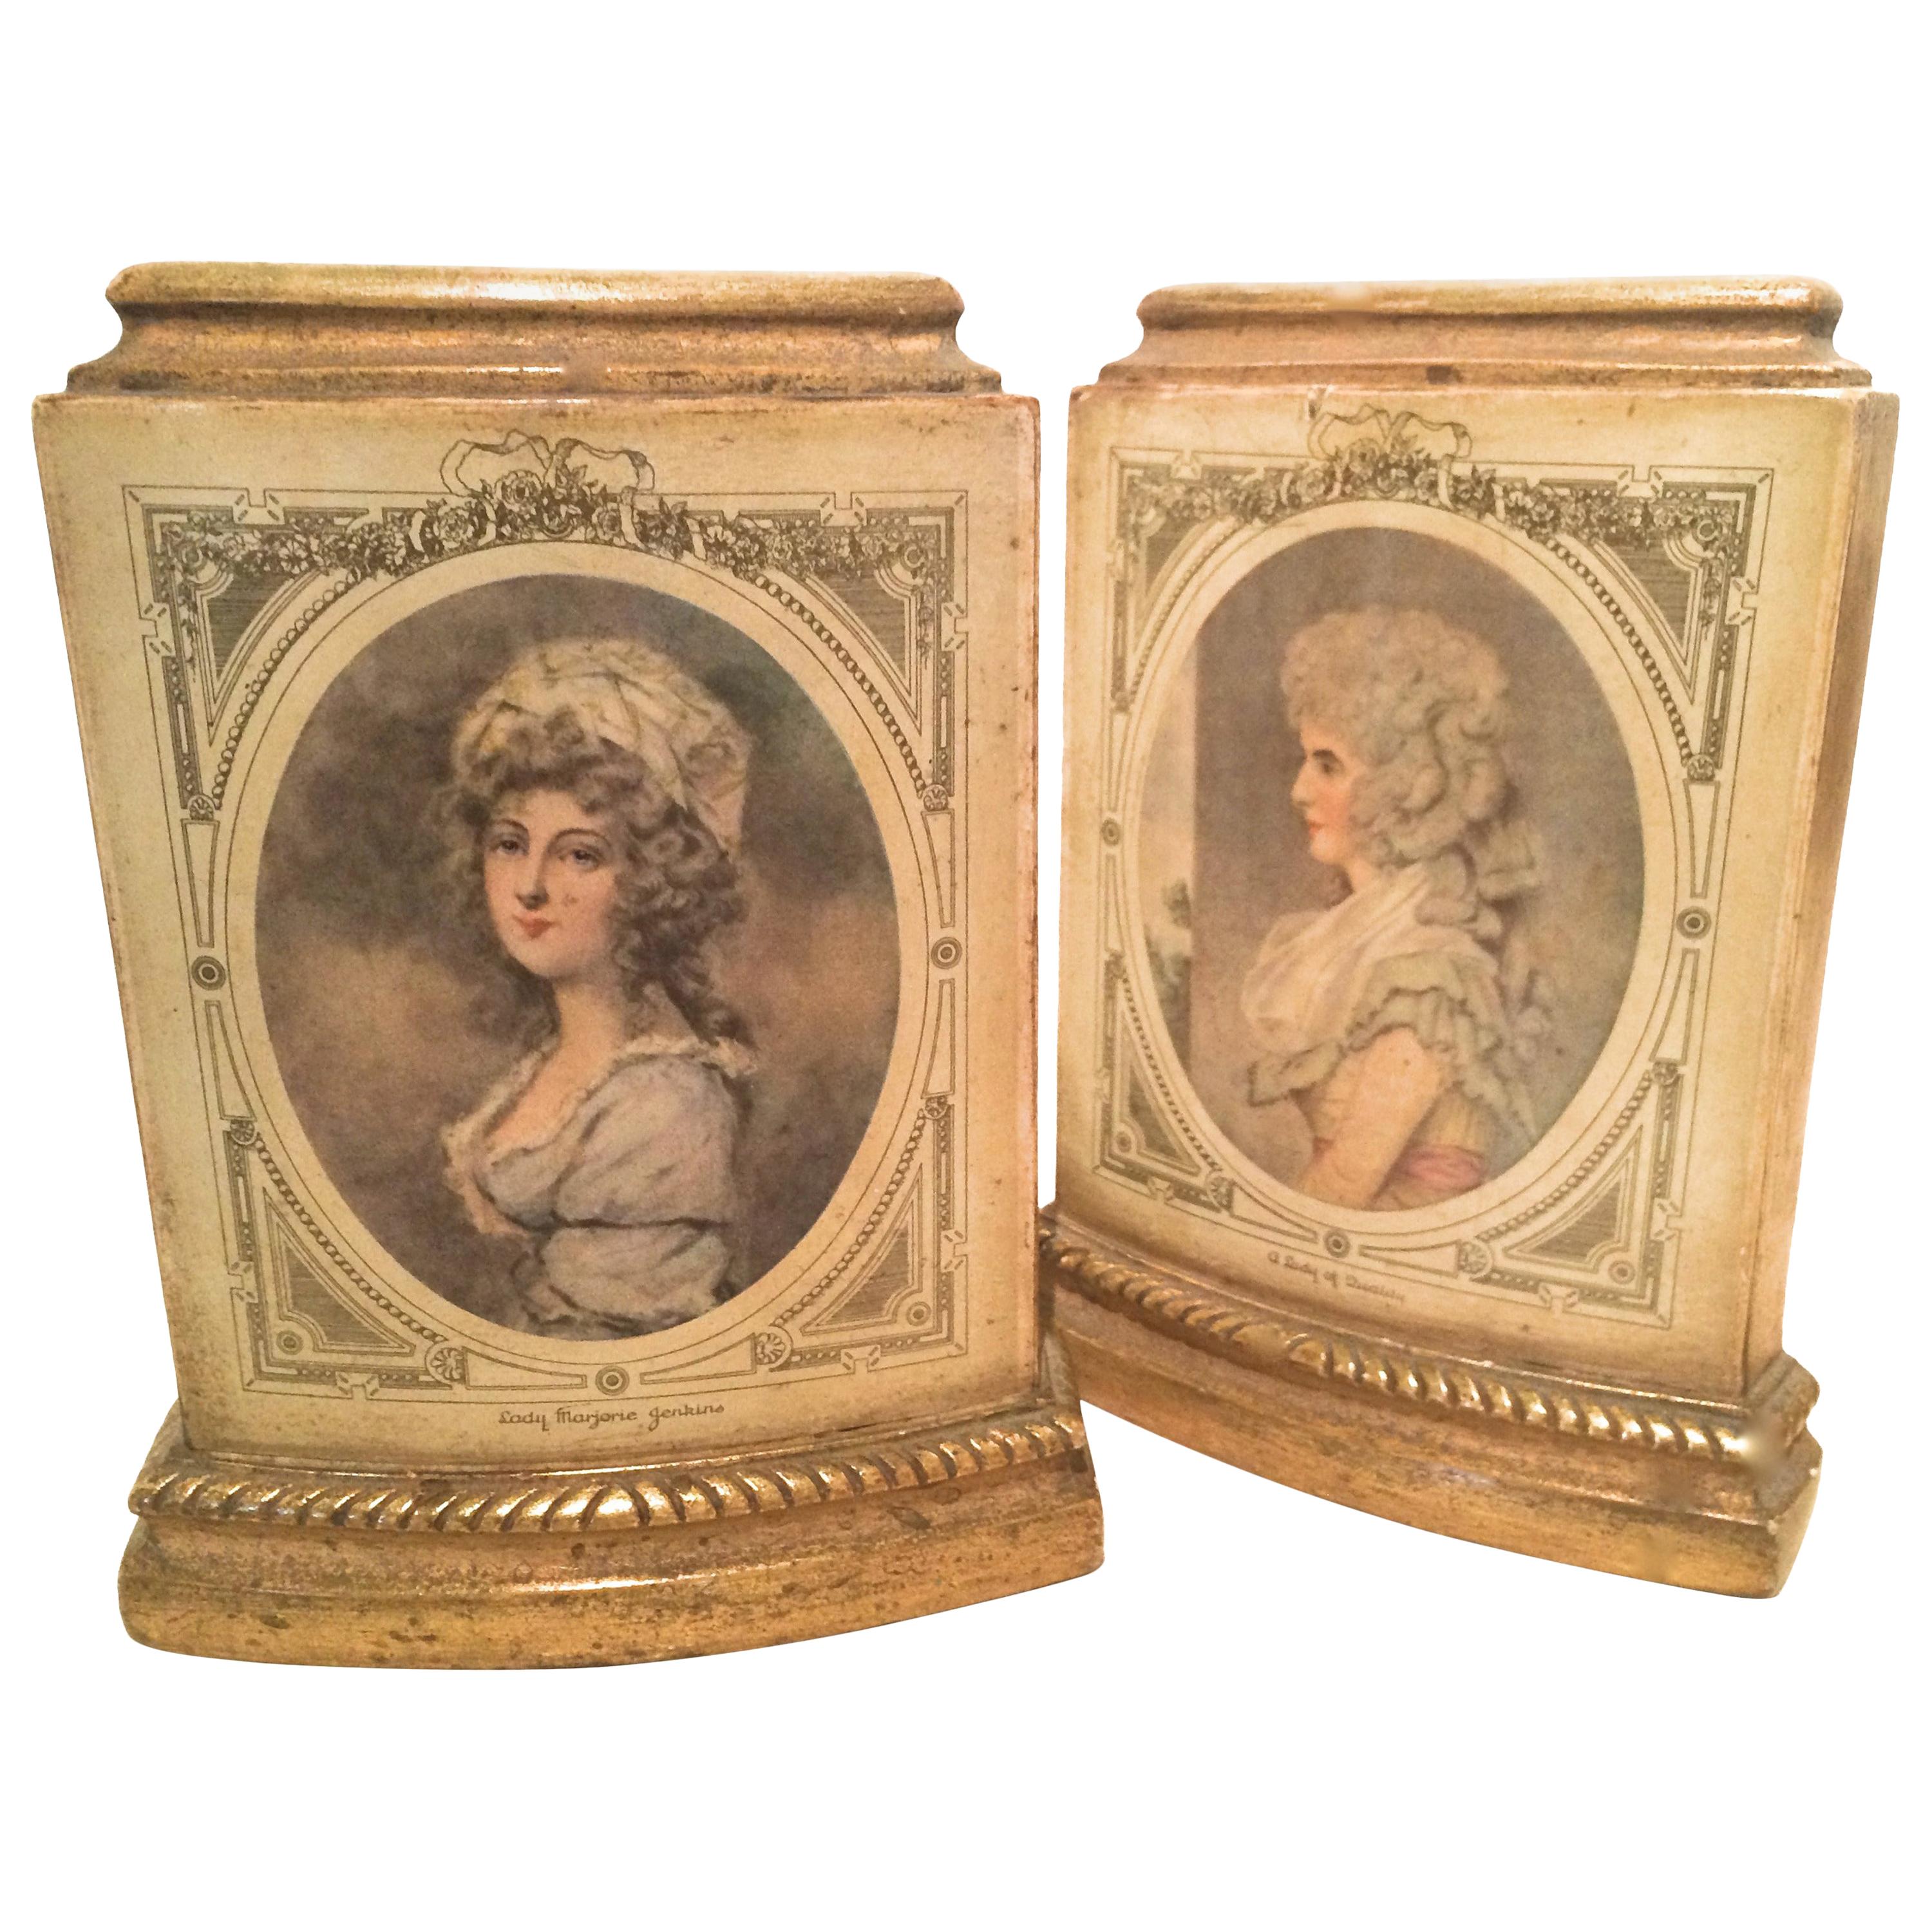 Pair of Italian Gilt Borghese Bookends with French Figures